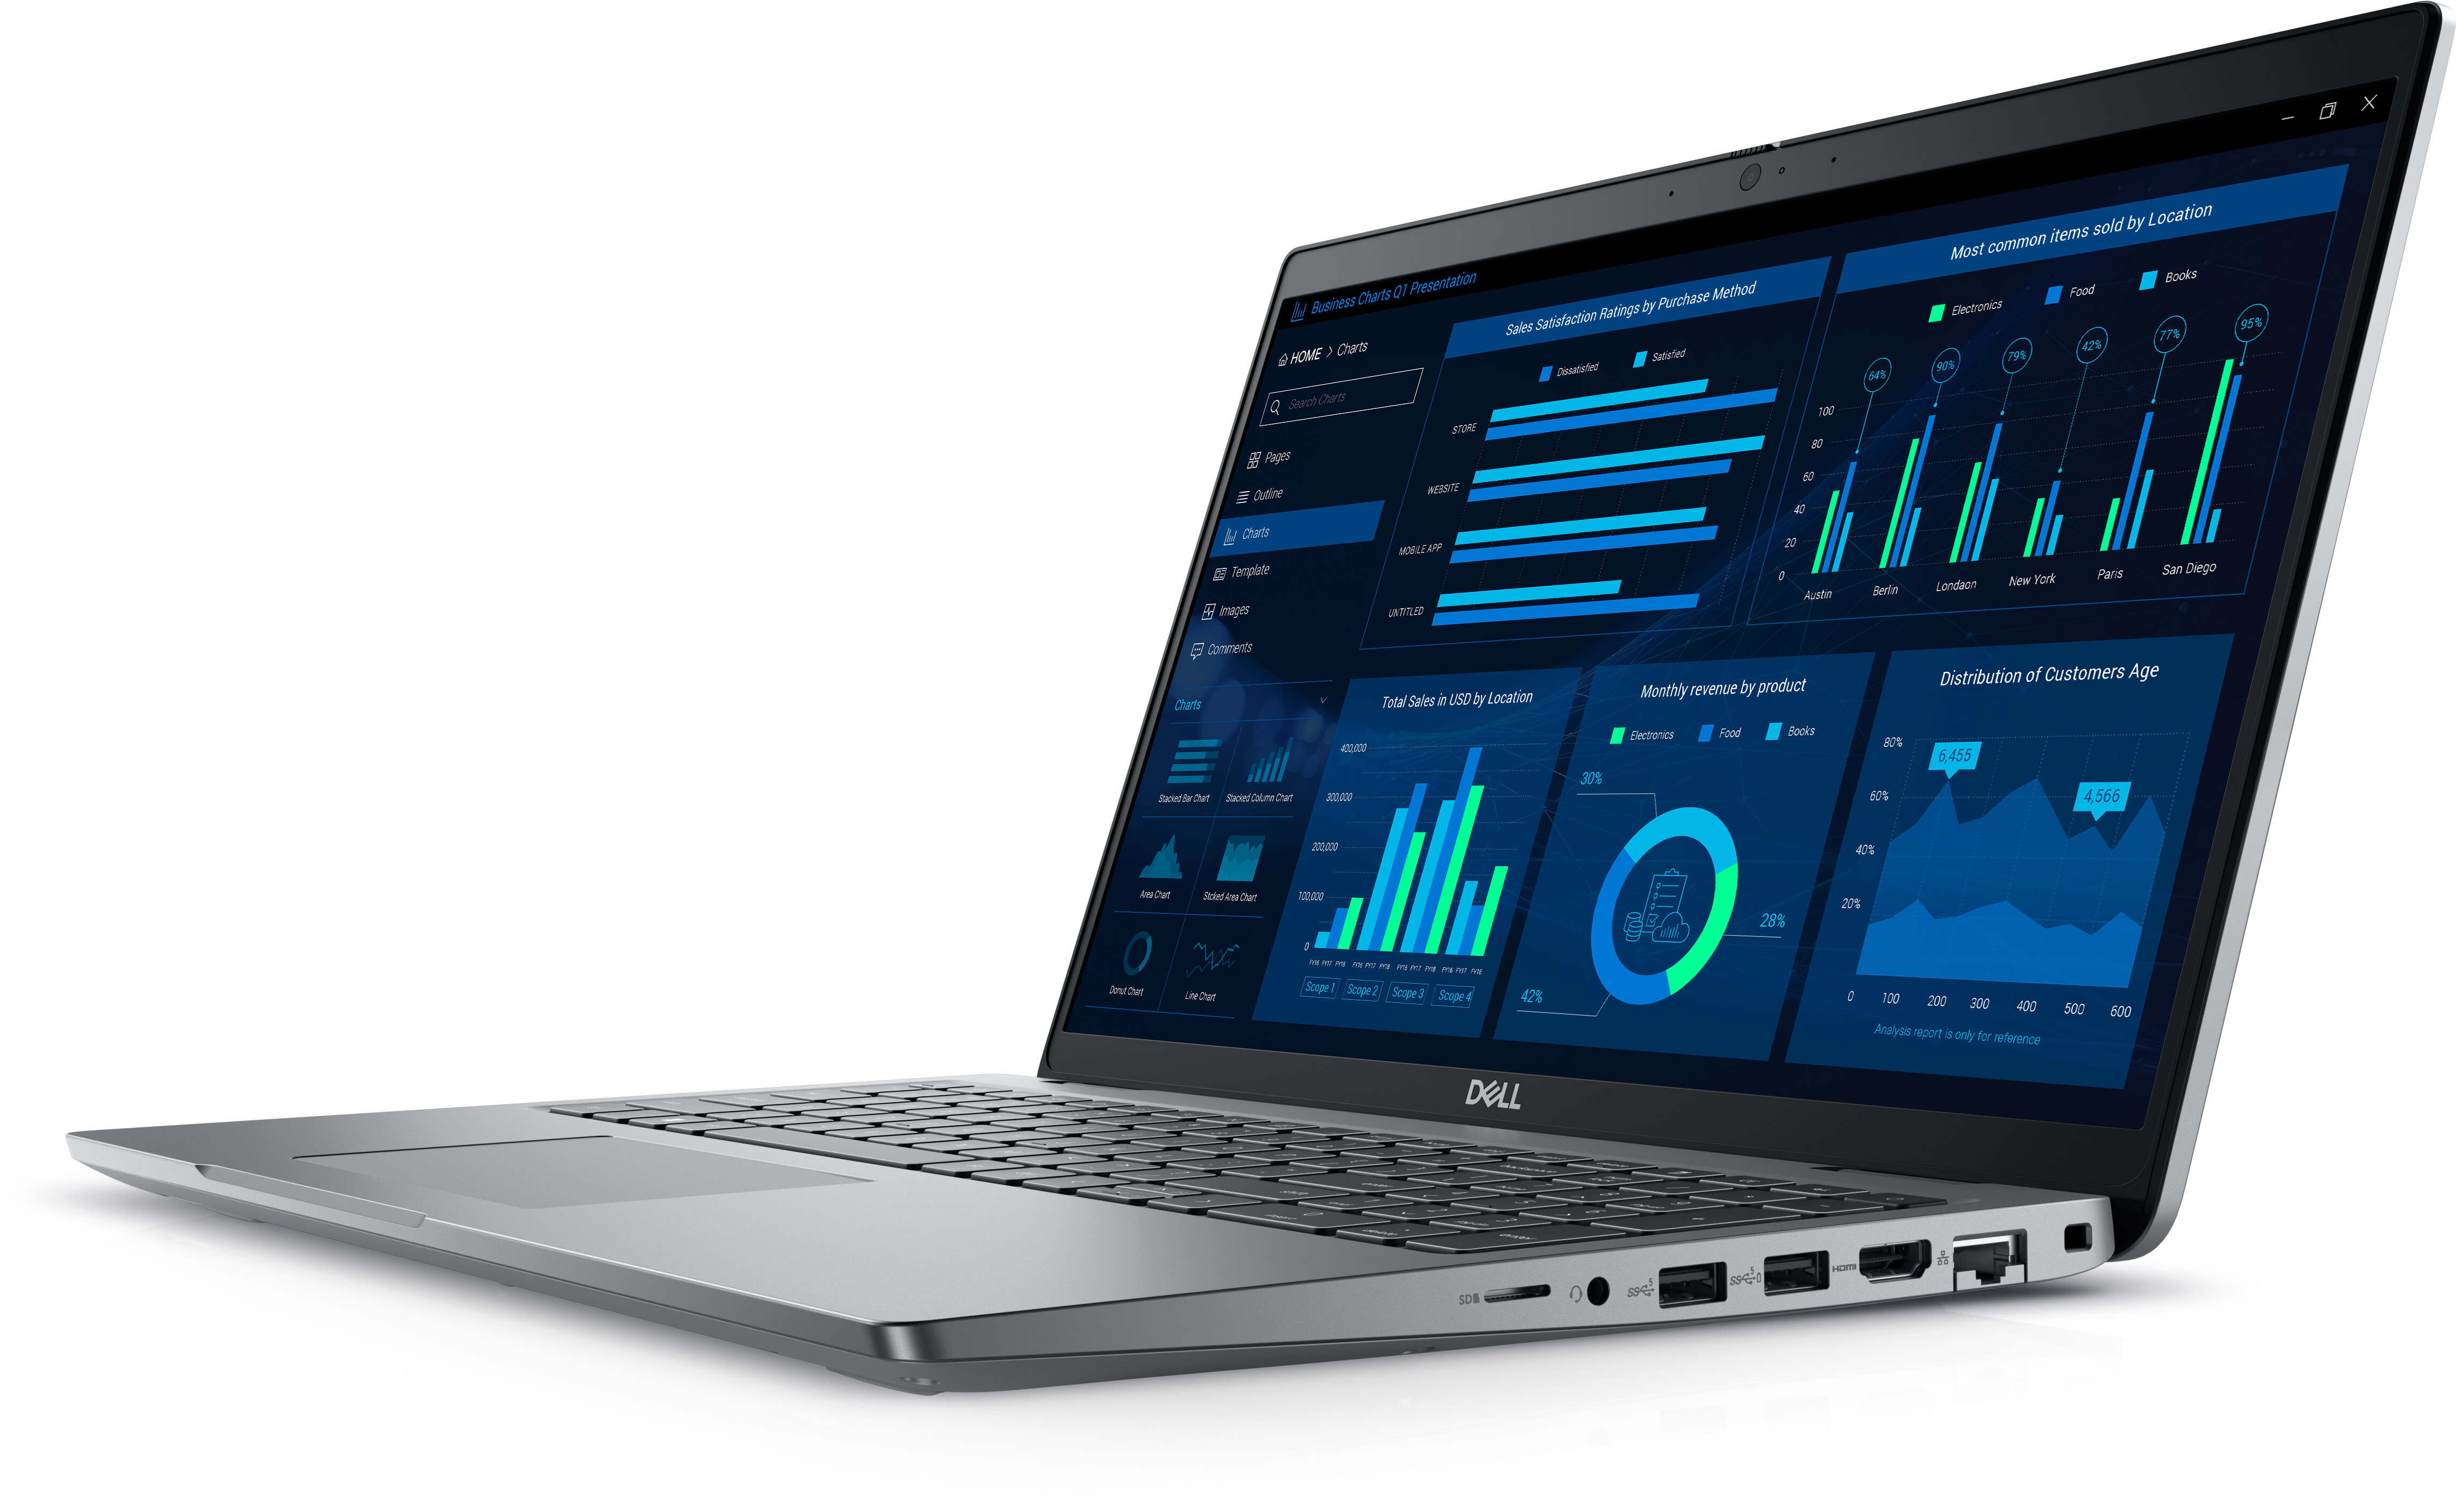 Dell Precision 7740 review: A weighty 17-inch mobile workstation